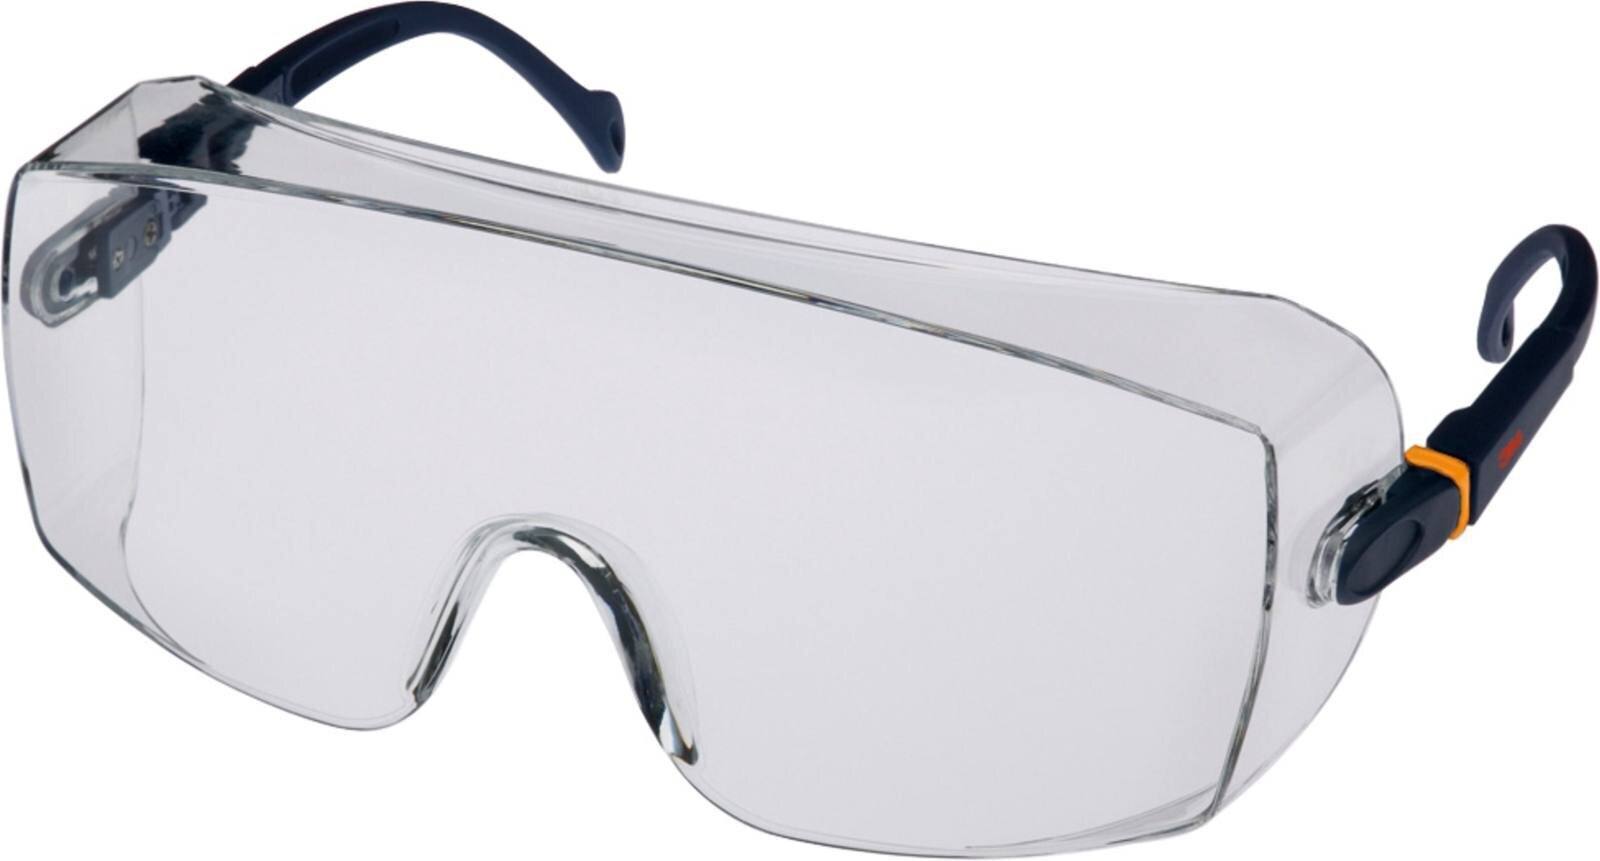 3M 2800 Safety spectacles AS/UV, PC, clear, adjustable, ideal as over-glasses for spectacle wearers